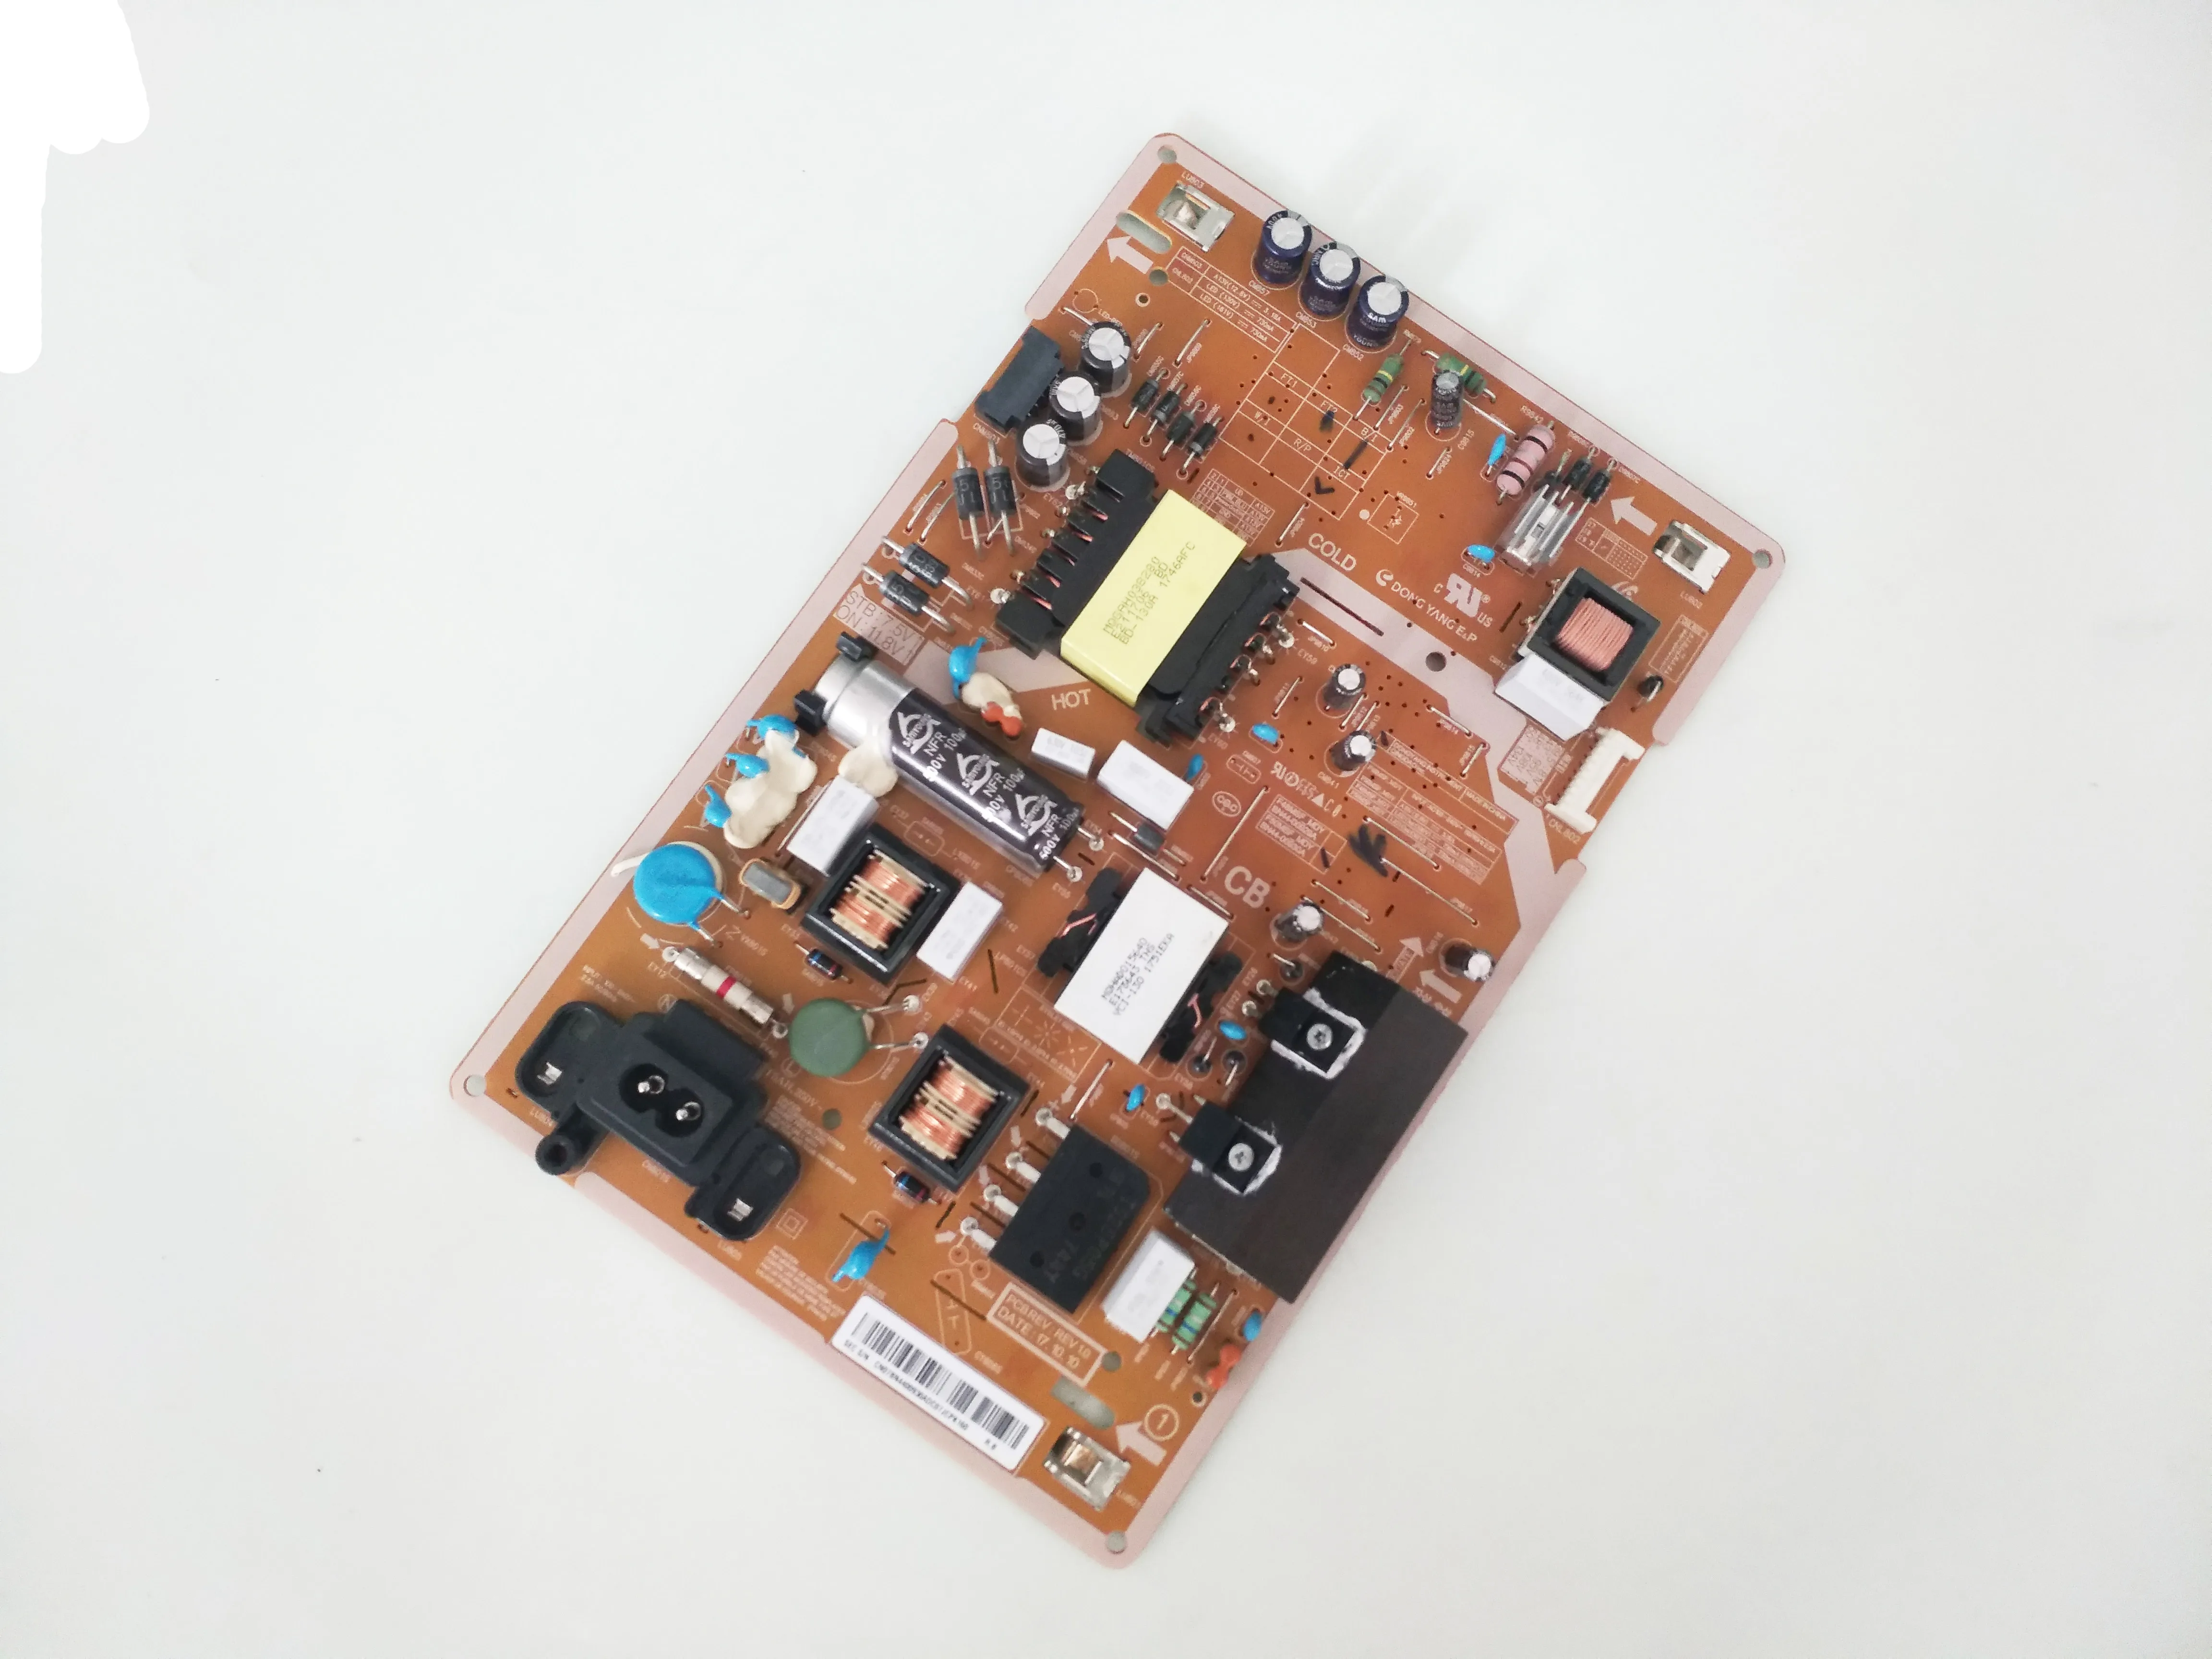 

New and Original BN44-00930A F50MSF_MDY Power Board Card Supply is For LH49DBJP UN55RU7300F LH49DCJPLGA H49DBJPLGC/XF TV Parts